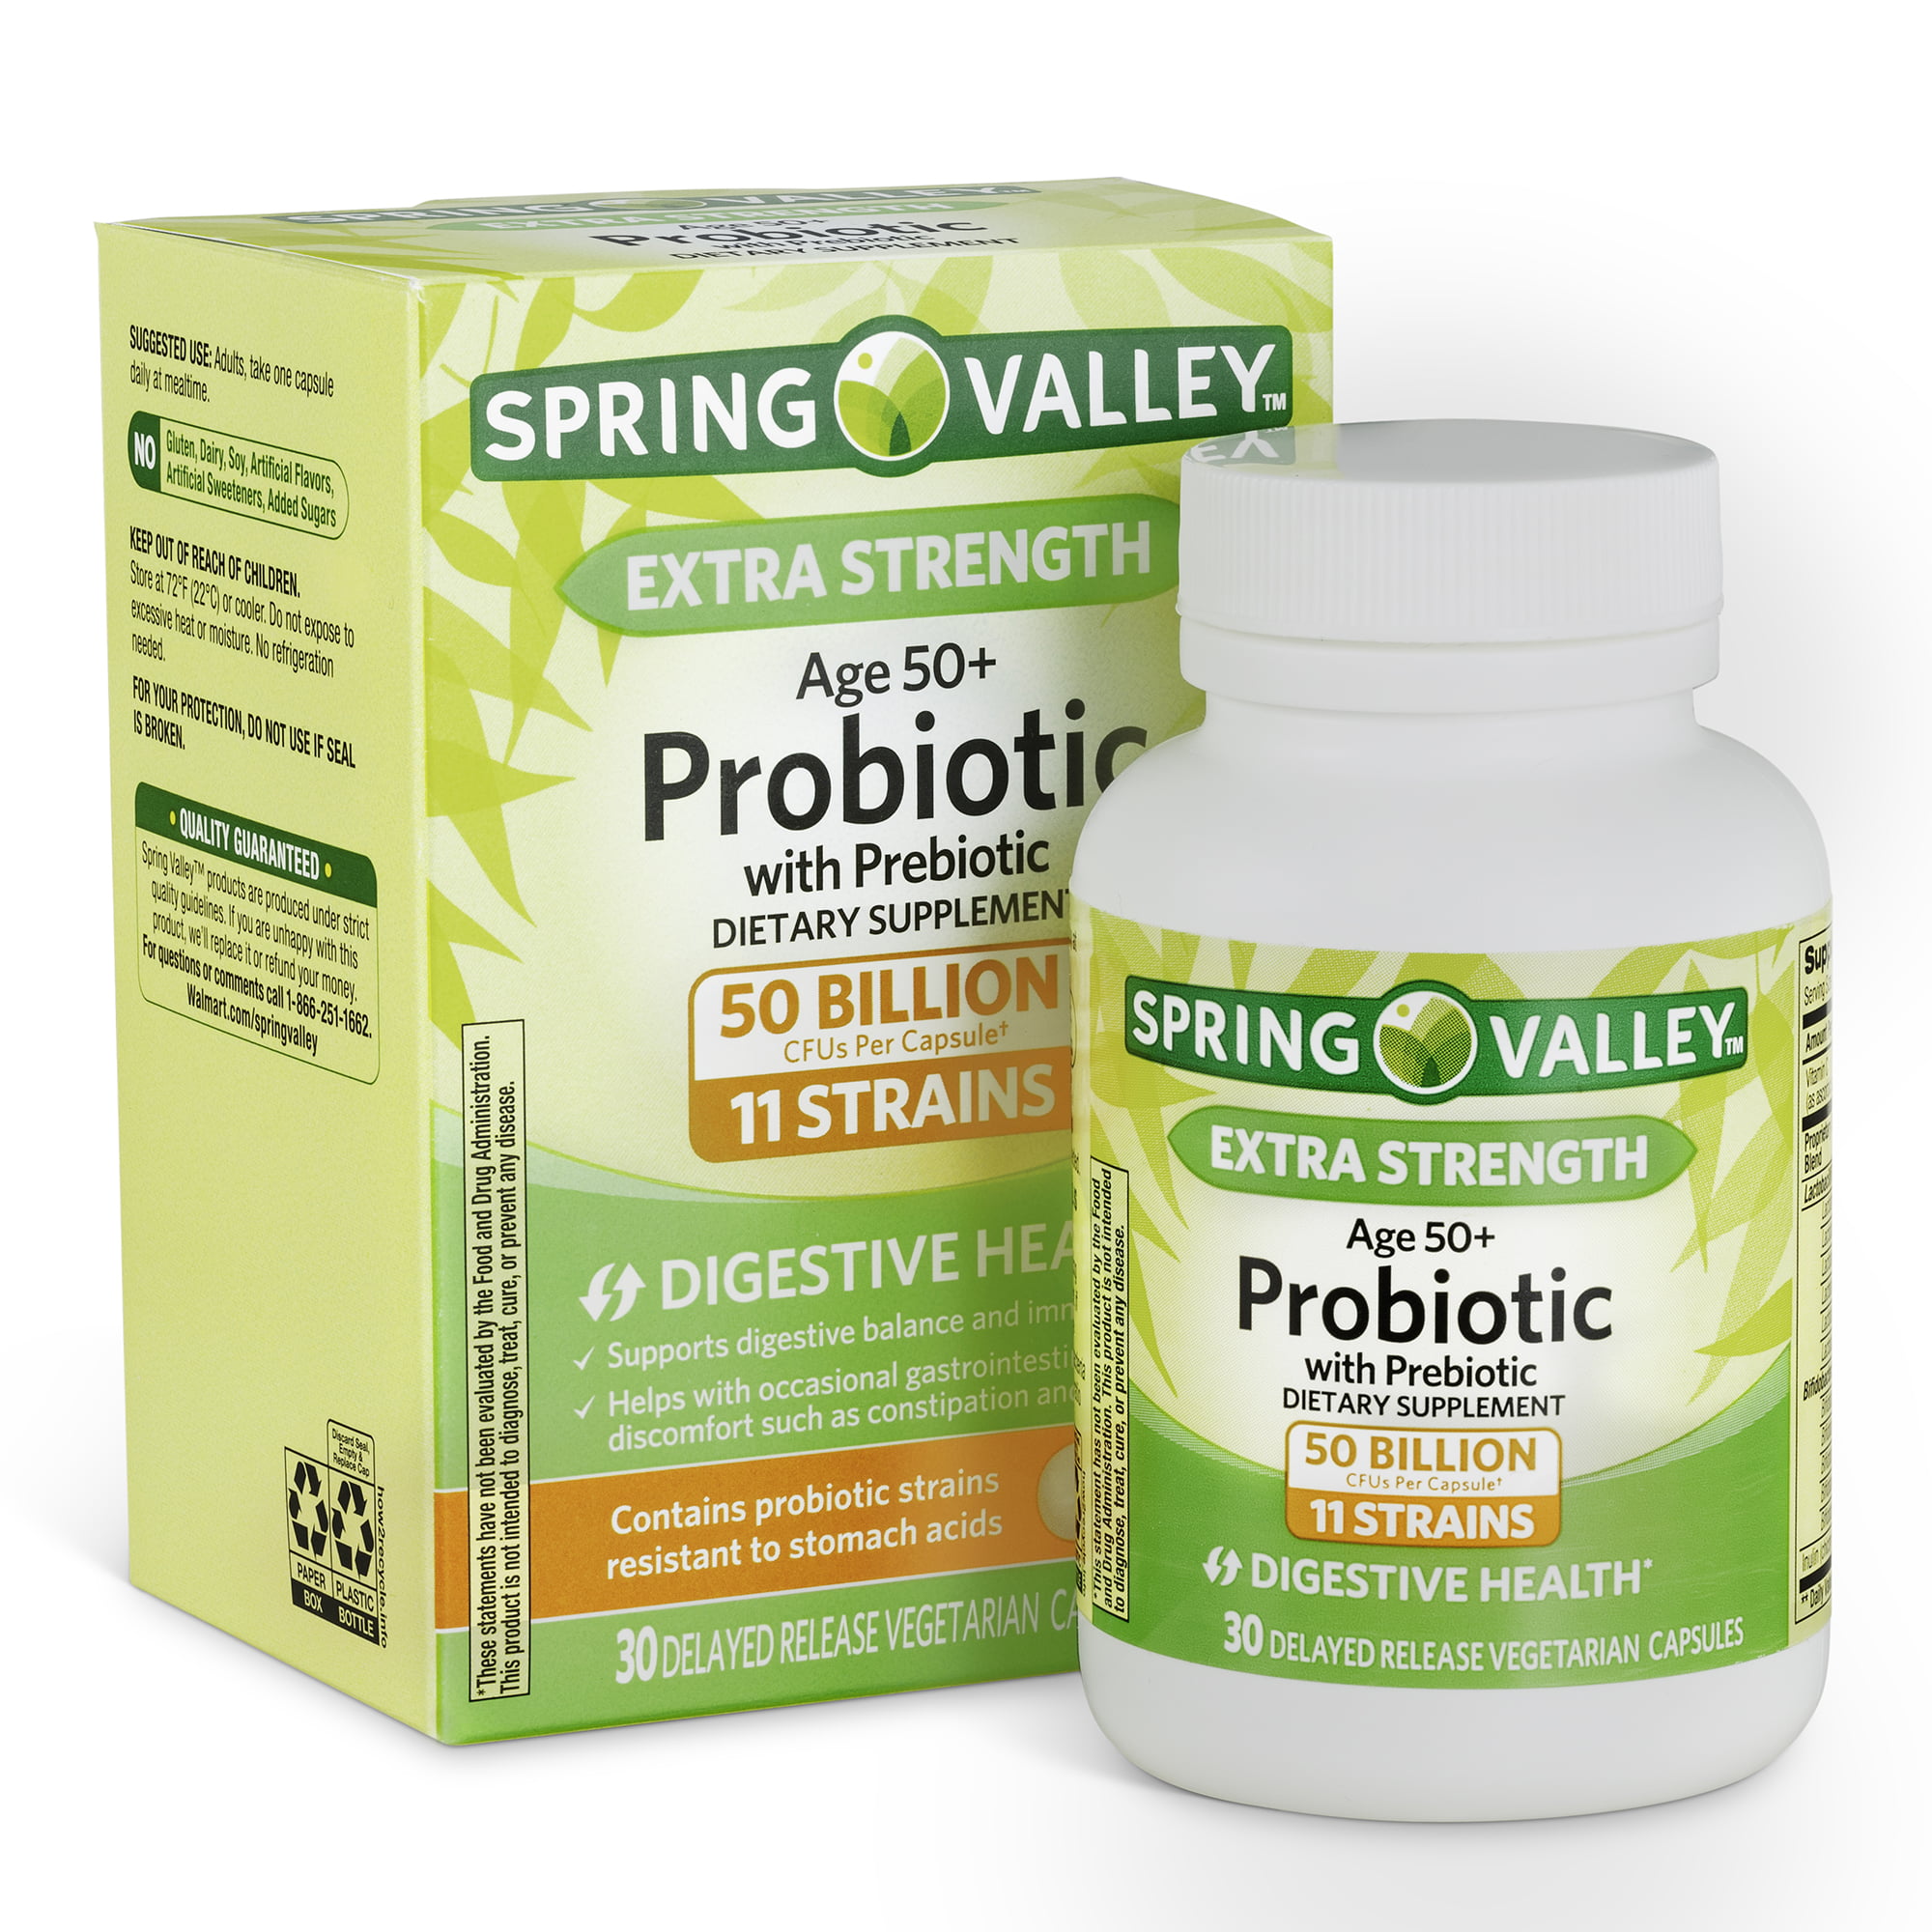 Spring Valley Extra Strength Age 50+ Probiotic with Prebiotic, 30 Count